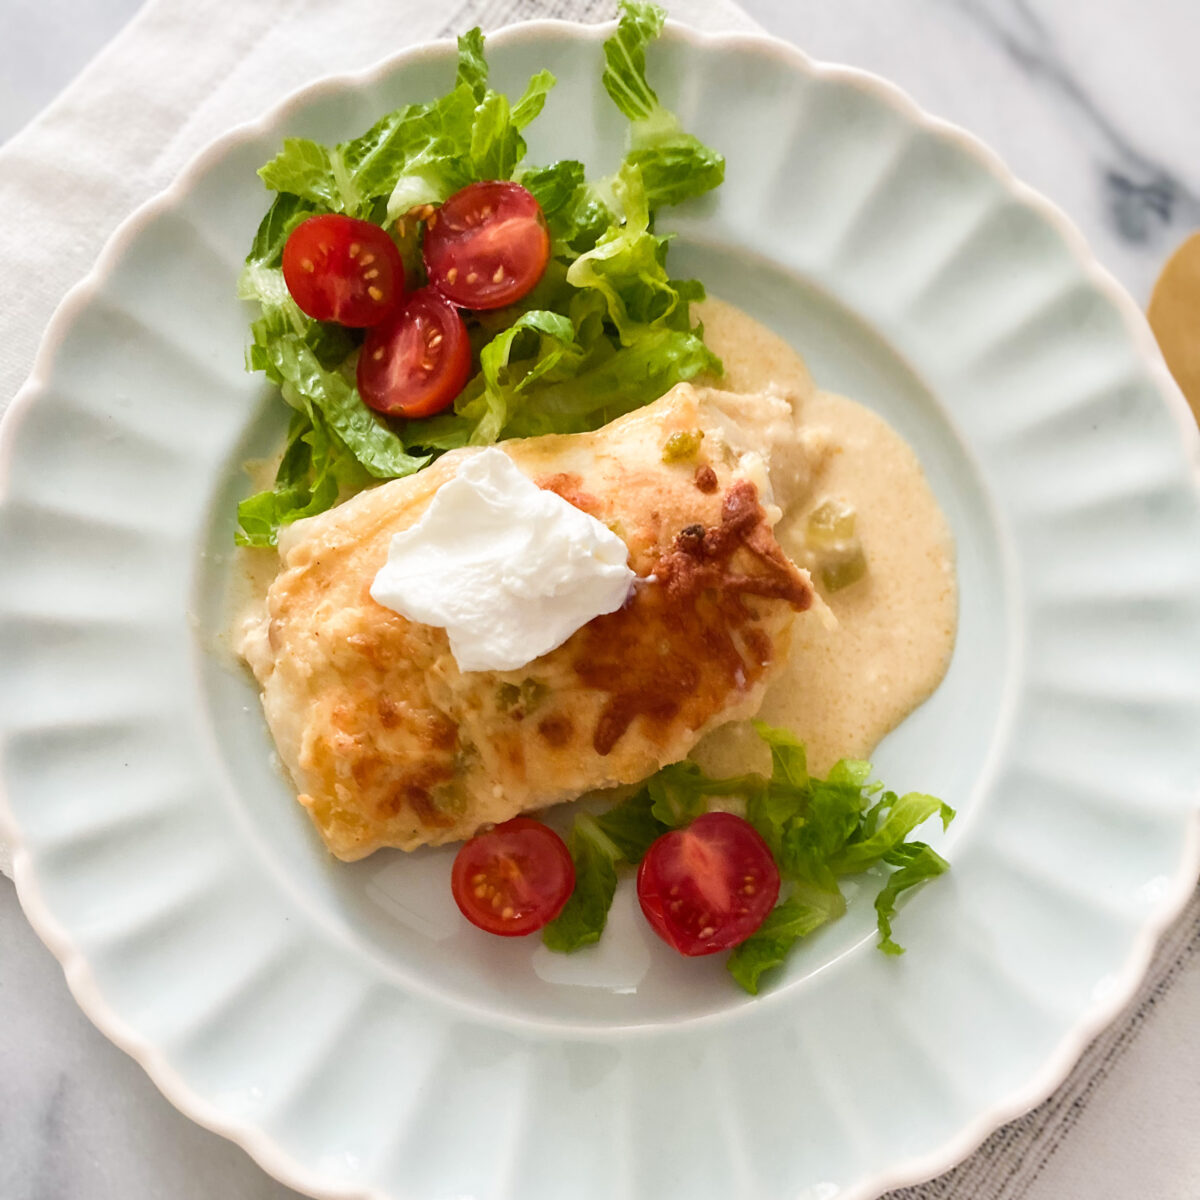 An enchilada on a plate with side salad and sour cream on top.